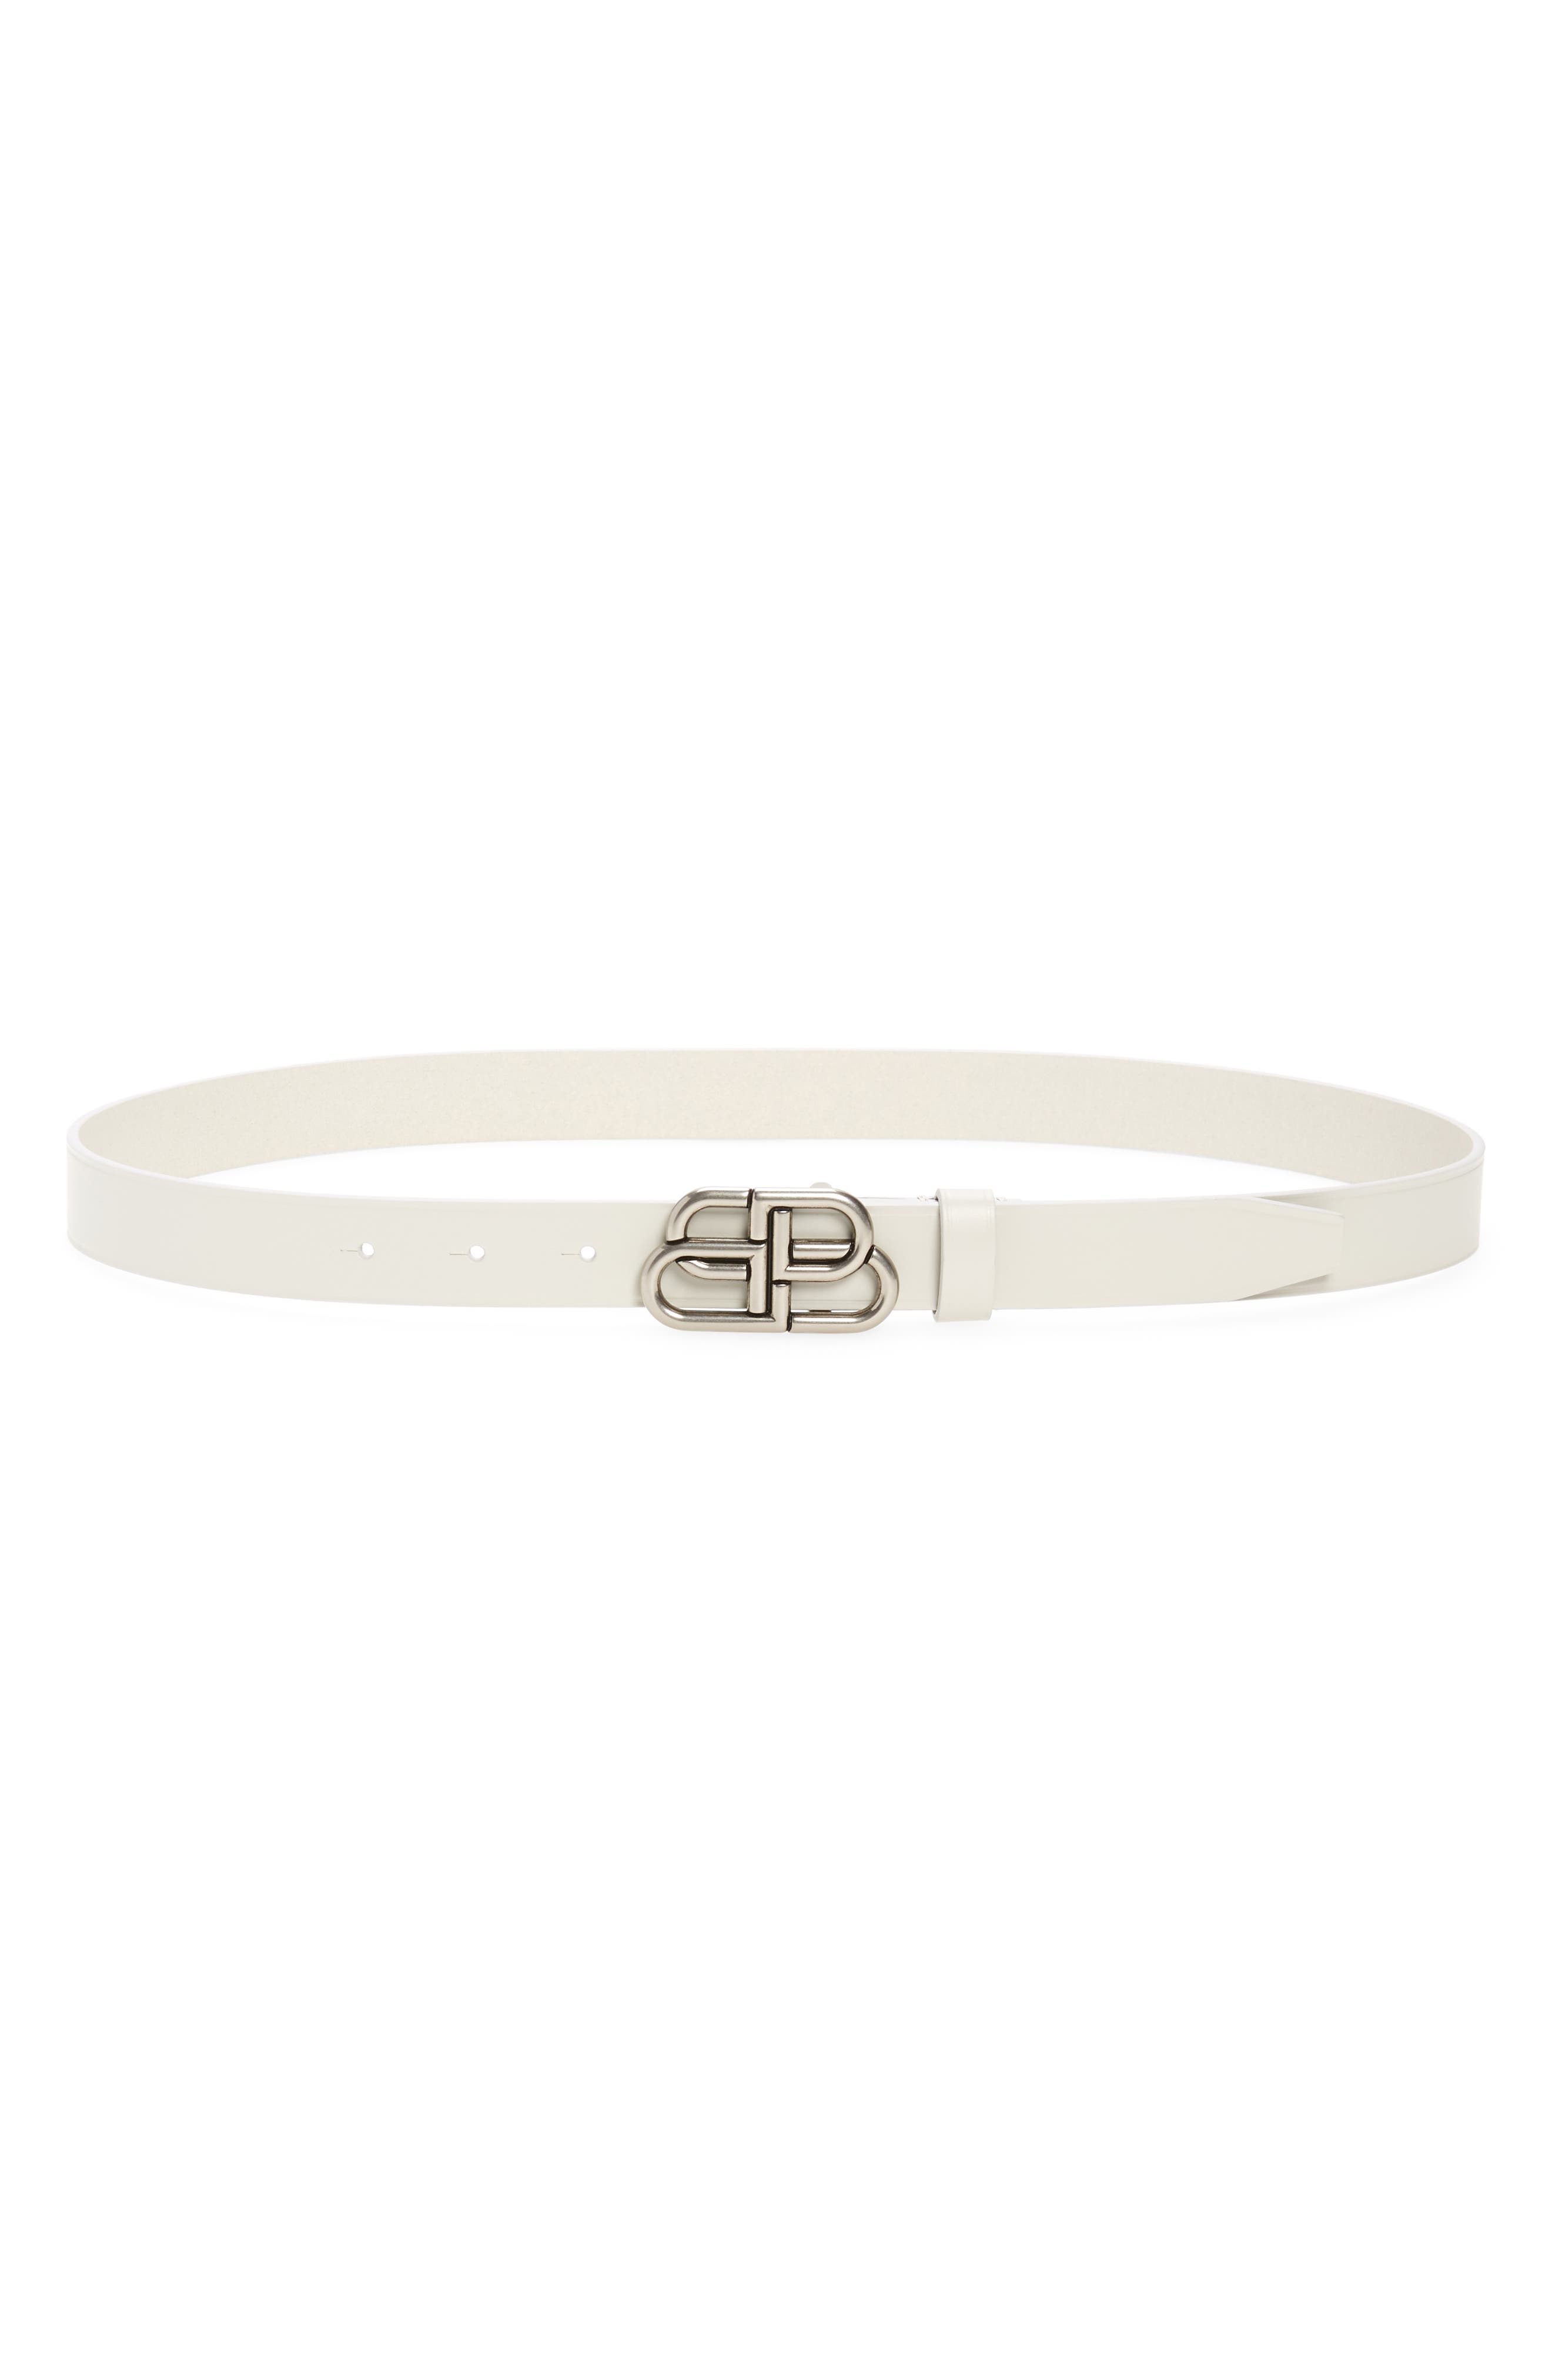 Balenciaga BB Logo Buckle Leather Belt in Chalky White at Nordstrom, Size 105